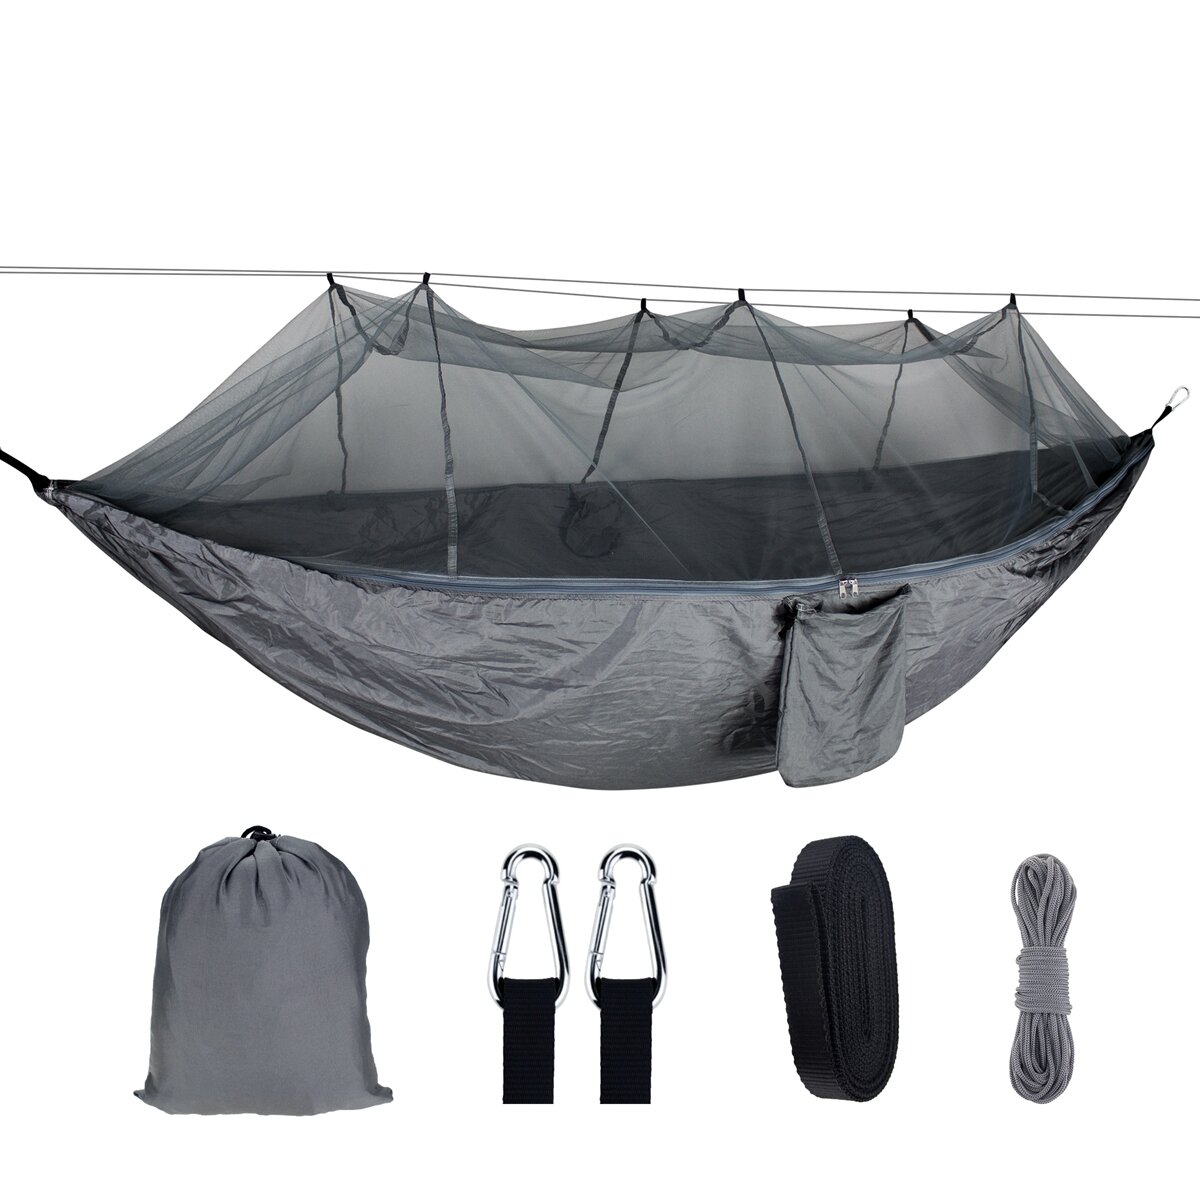 

1-2 Person Portable Outdoor Camping Hammock with Mosquito Net High Strength Parachute Fabric Hanging Bed Hunting Sleepin